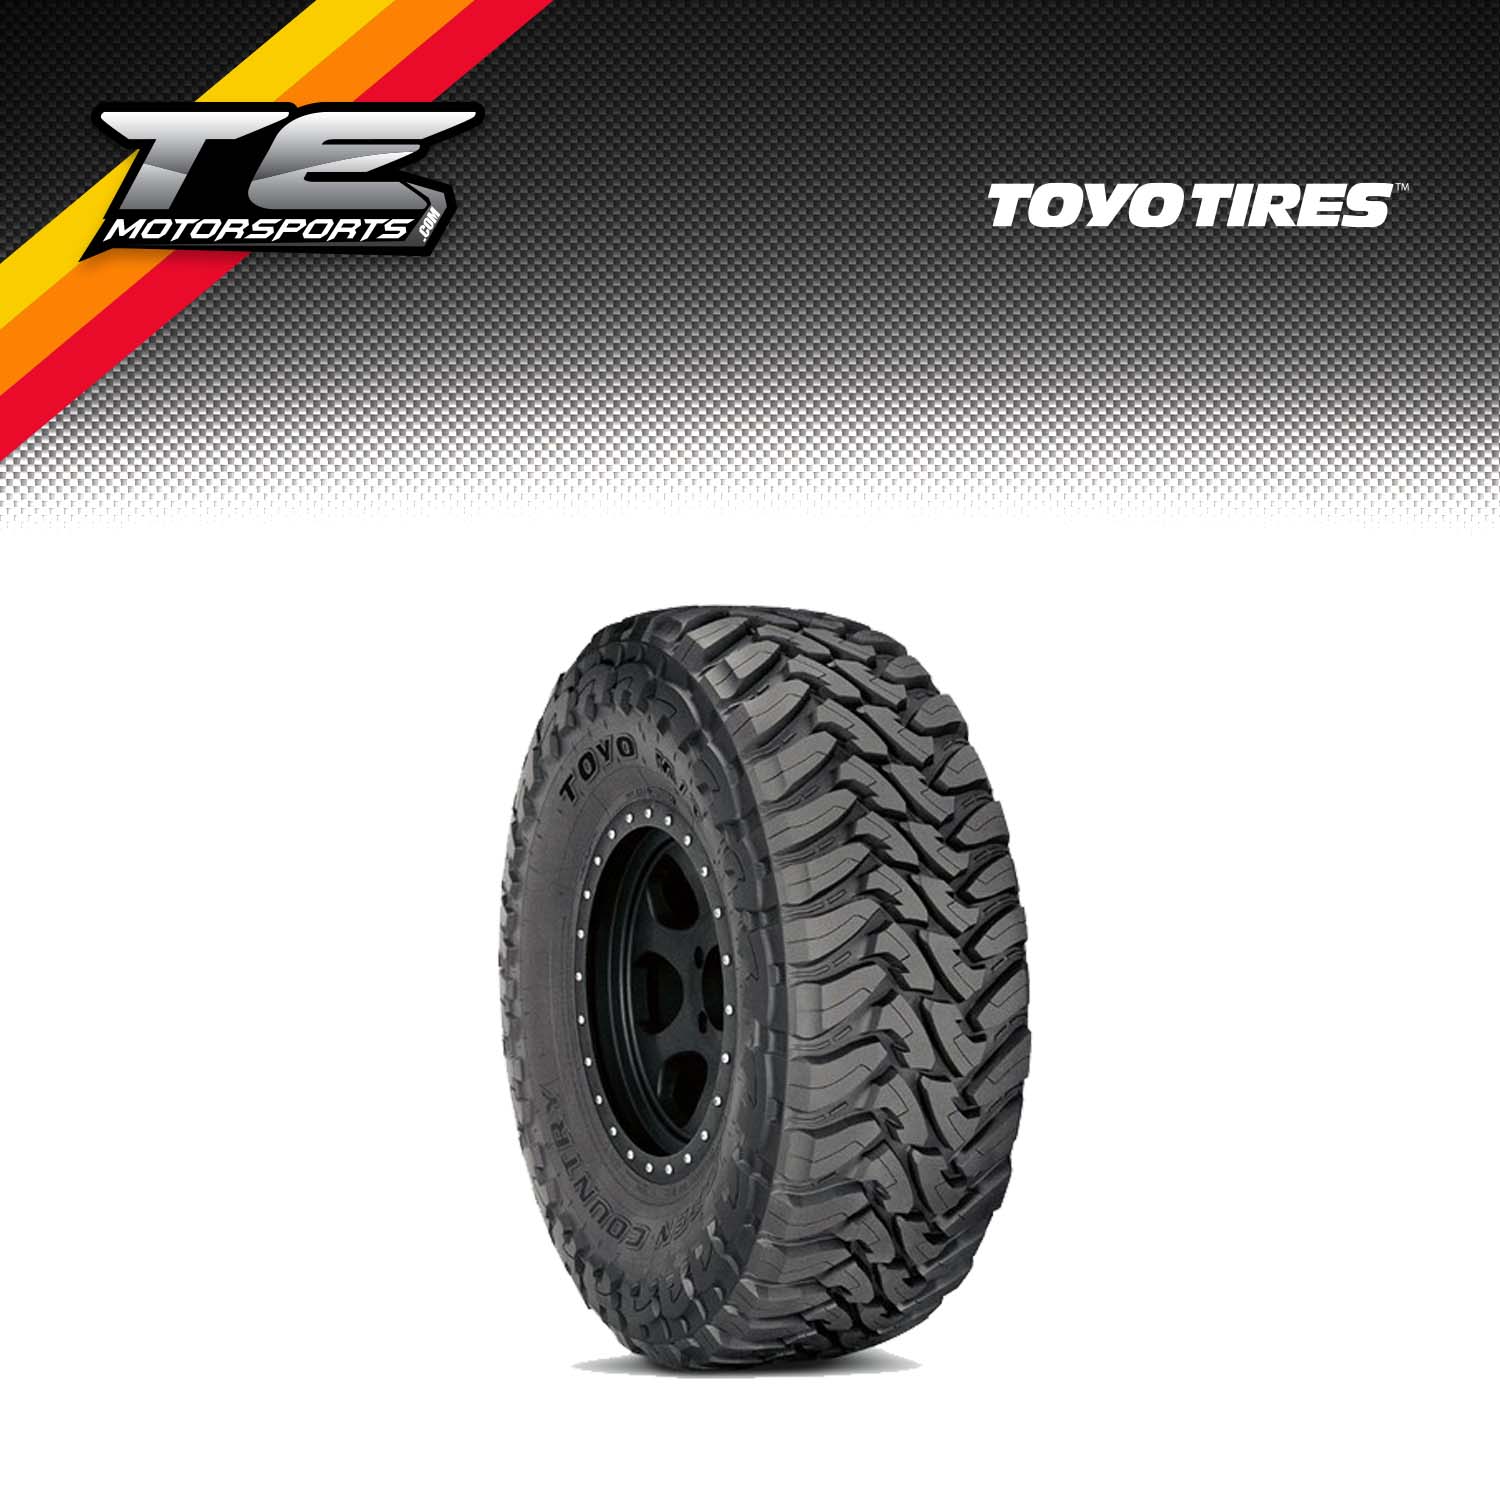 Toyo Tires 35x12.50R17LT Tire, Open Country M/T - 360310